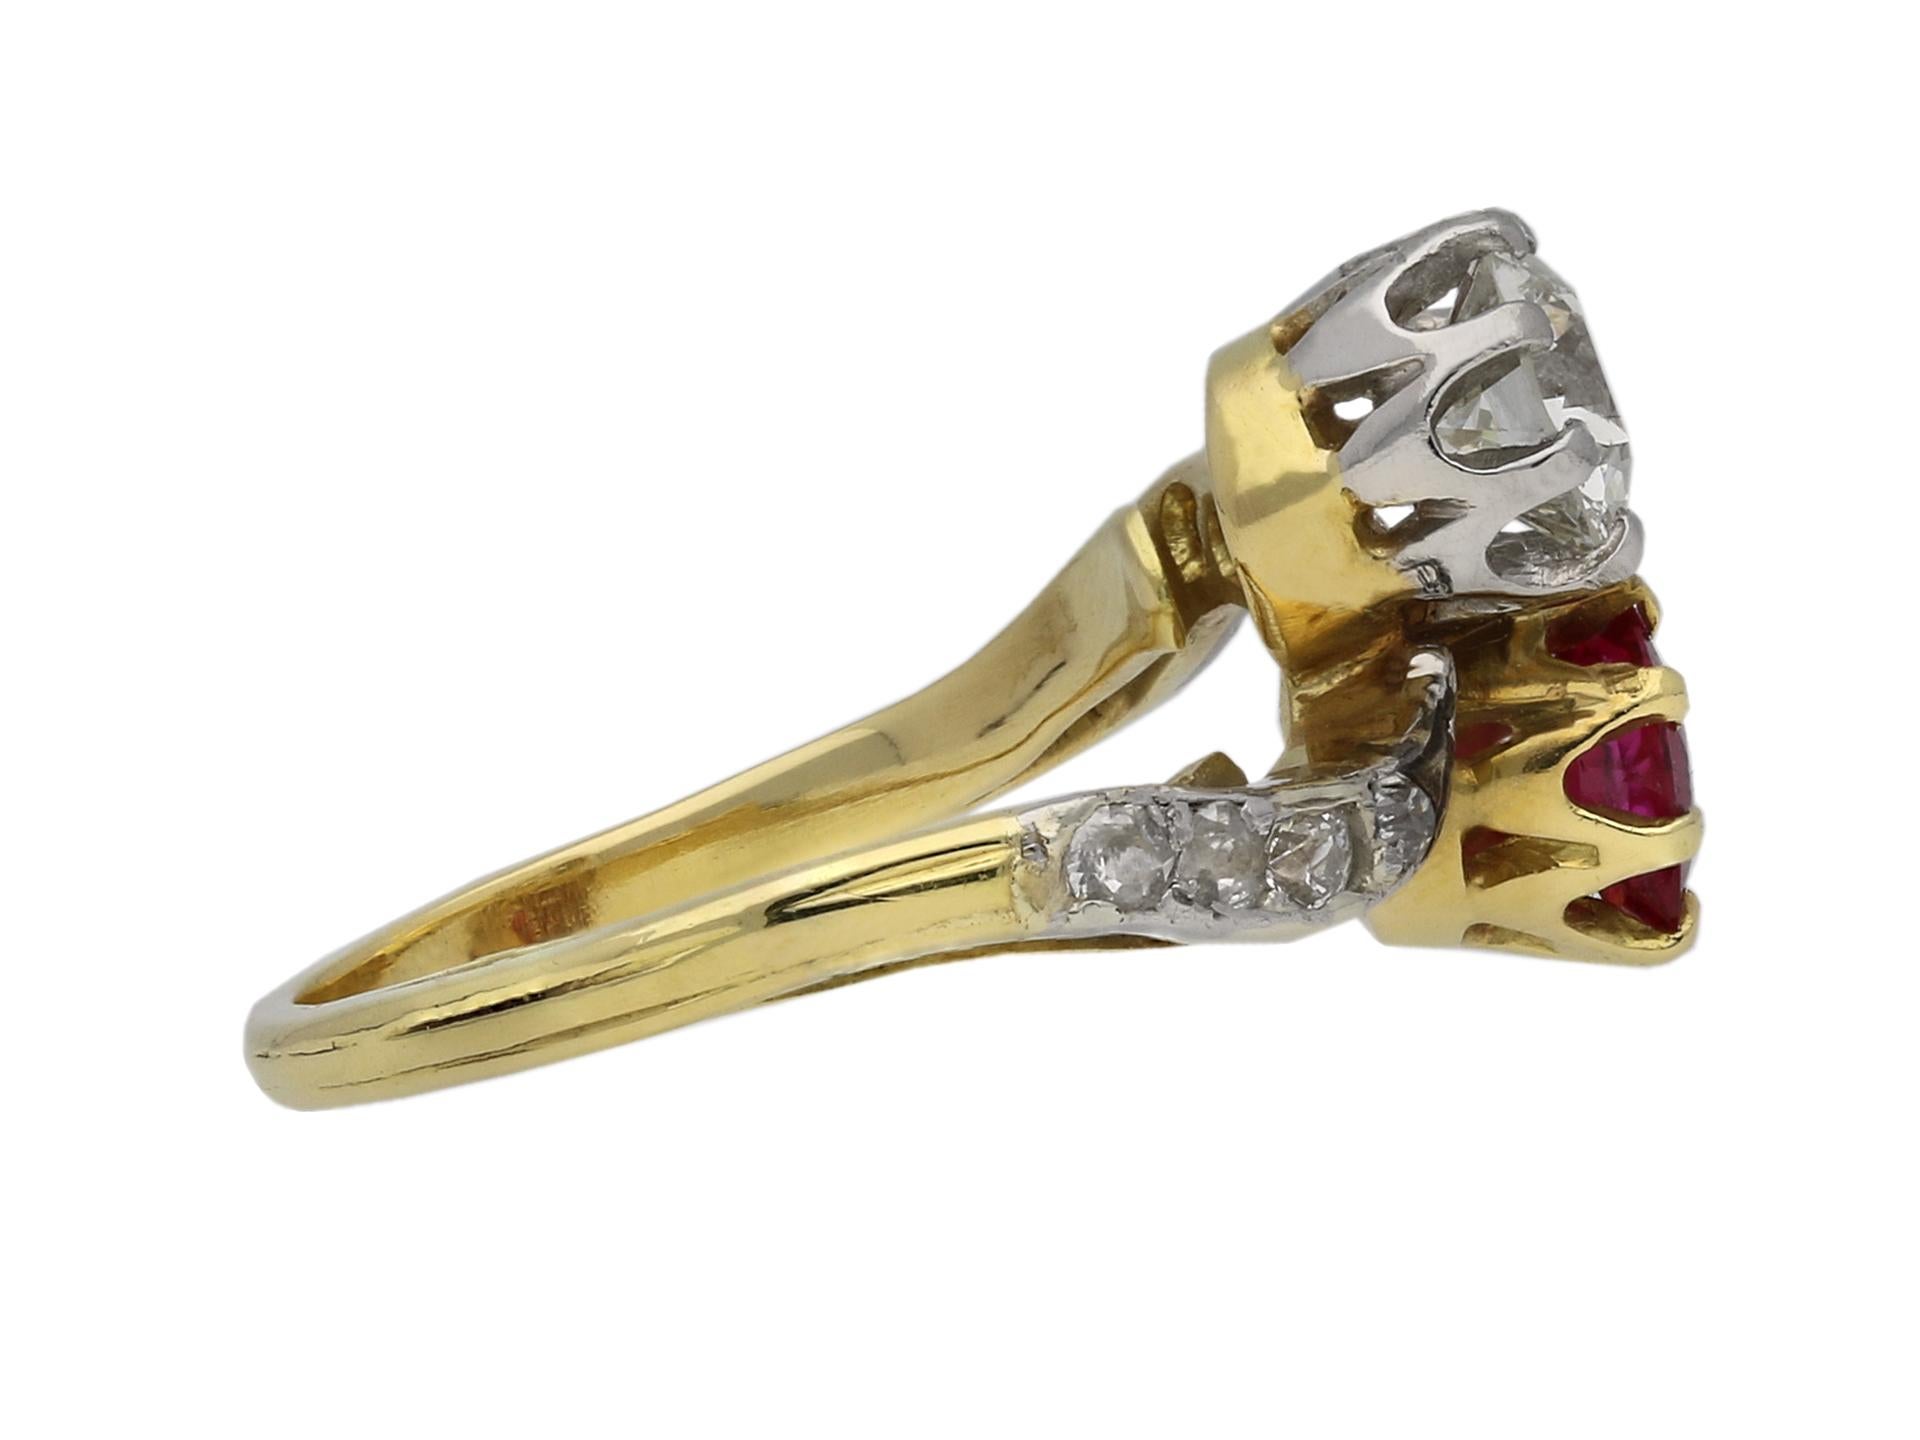 Edwardian Burmese ruby and diamond cross over ring. Set with a cushion shape old cut natural unenhanced Burmese ruby in an open back claw setting with an approximate weight of 0.70 carats, further set with a round old cut diamond with an approximate